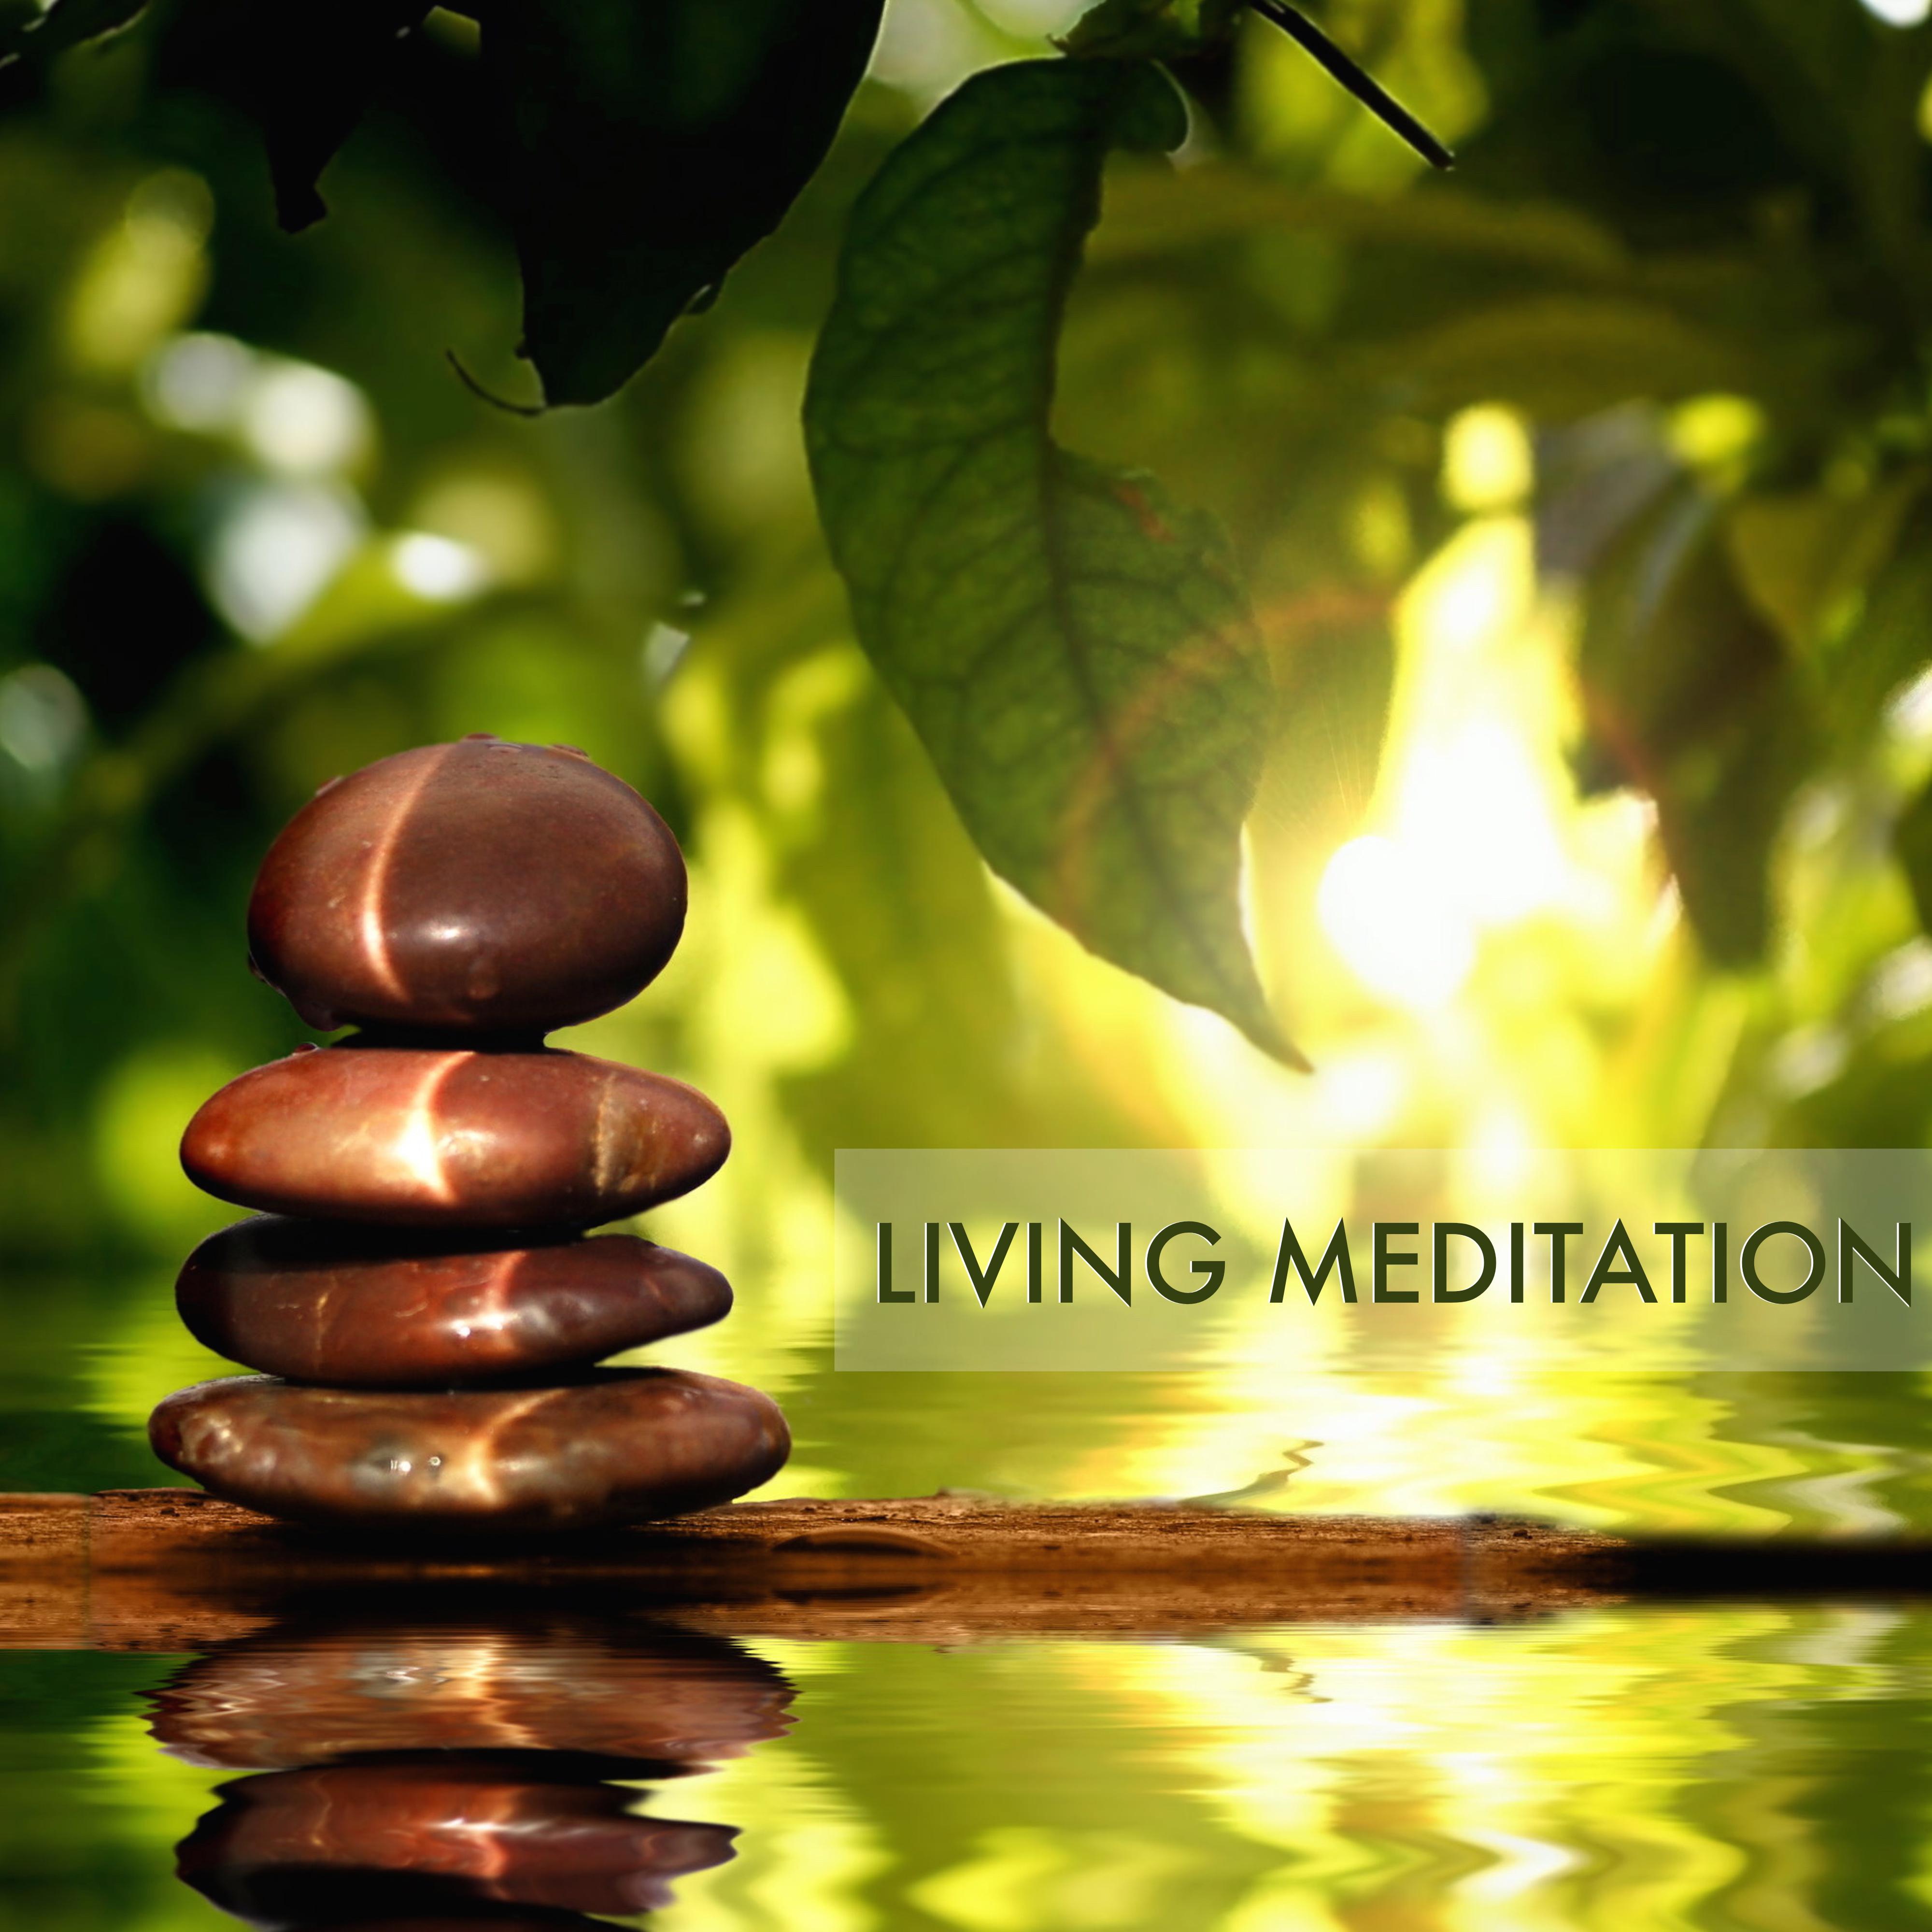 Living Meditation - Deep Meditation Music & Buddhist Relaxation Songs to Learn How to Meditate